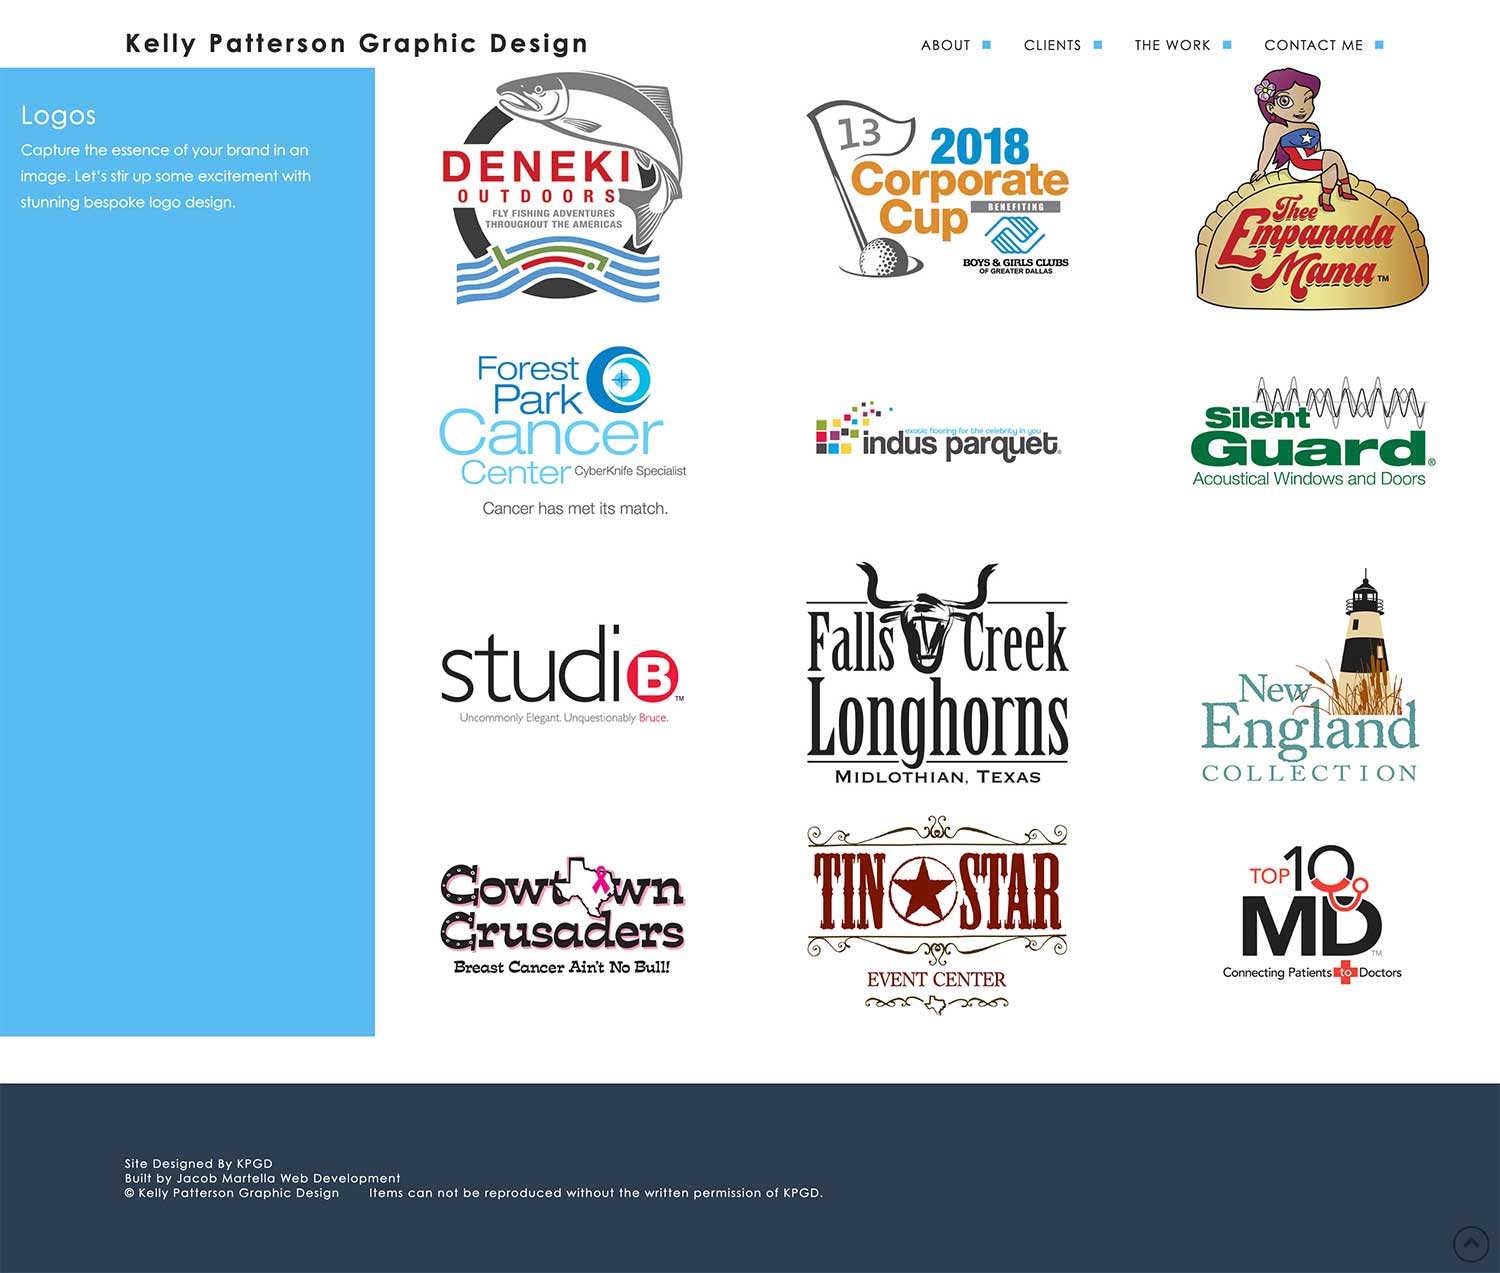 Logos Page of Kelly Patterson Graphic Design